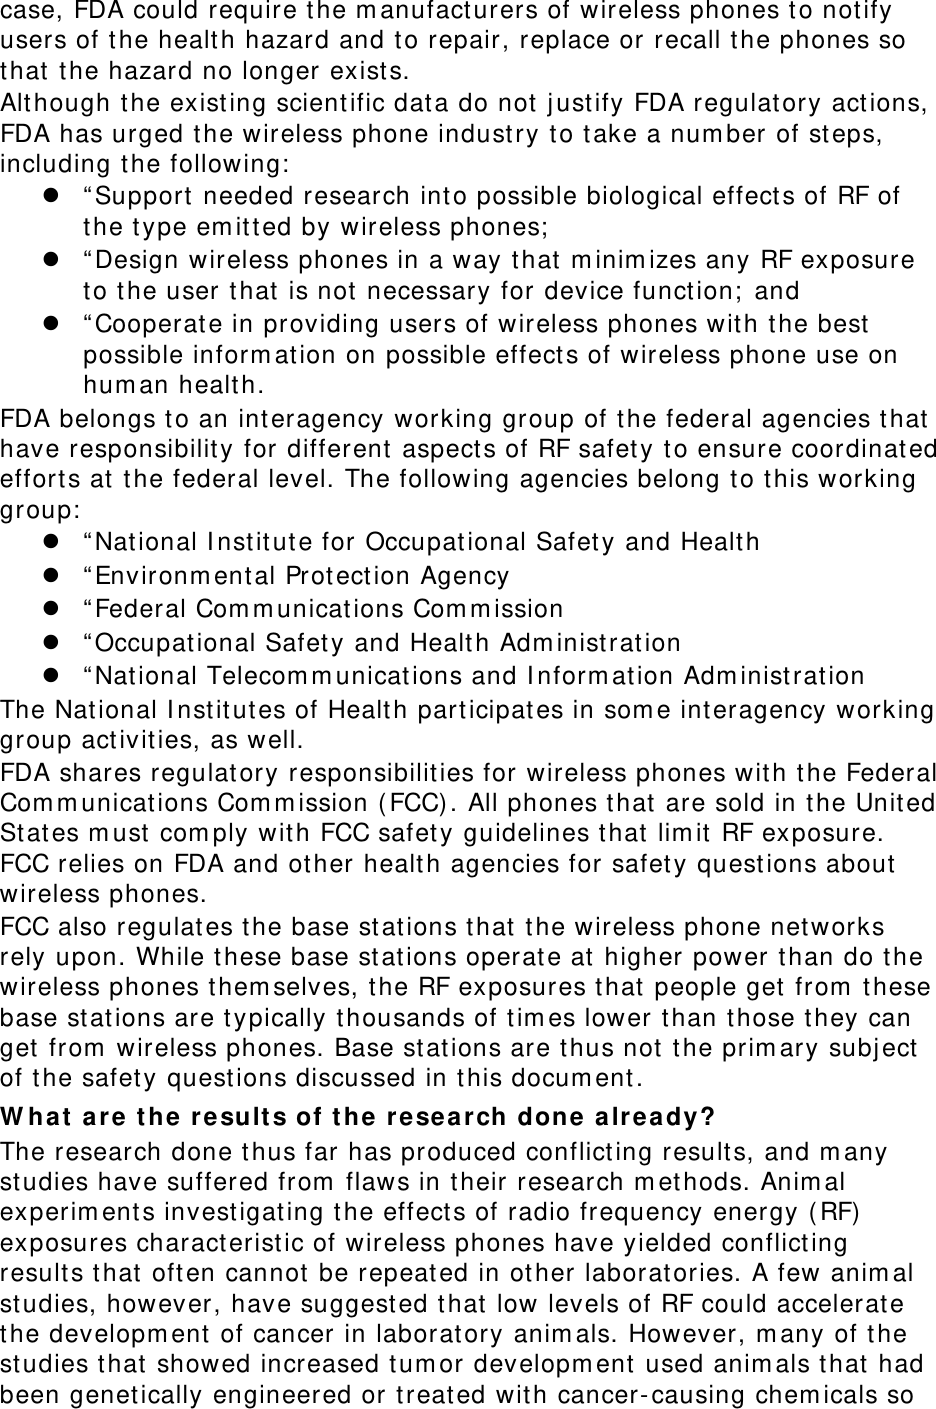 case, FDA could require t he m anufact urers of wireless phones t o not ify users of t he healt h hazard and t o repair, replace or recall the phones so that  t he hazard no longer exist s. Although t he existing scient ific dat a do not  j ust ify FDA regulat ory act ions, FDA has urged t he wireless phone indust ry to take a num ber of st eps, including t he following:   “ Support needed research into possible biological effect s of RF of the t ype em itt ed by wireless phones;   “ Design wireless phones in a way that  m inim izes any RF exposure to the user t hat  is not  necessary for device funct ion;  and  “ Cooperat e in providing users of wireless phones wit h t he best possible inform at ion on possible effect s of wireless phone use on hum an healt h. FDA belongs t o an interagency working group of the federal agencies t hat  have responsibilit y for different  aspects of RF safet y t o ensure coordinat ed effort s at  the federal level. The following agencies belong to t his working group:   “ Nat ional I nst itute for Occupat ional Safety and Healt h  “ Environm ent al Protection Agency  “ Federal Com m unicat ions Com m ission  “ Occupat ional Safety and Healt h Adm inist rat ion  “ Nat ional Telecom m unicat ions and I nform at ion Adm inist rat ion The Nat ional I nst it utes of Healt h part icipates in som e interagency working group act ivit ies, as well. FDA shares regulat ory responsibilit ies for wireless phones wit h t he Federal Com m unicat ions Com m ission ( FCC). All phones t hat  are sold in t he Unit ed St ates m ust  com ply with FCC safet y guidelines t hat  lim it  RF exposure. FCC relies on FDA and ot her healt h agencies for safet y questions about  wireless phones. FCC also regulat es t he base st at ions t hat  the wireless phone networks rely upon. While t hese base st ations operate at  higher power t han do t he wireless phones t hem selves, t he RF exposures t hat  people get from  t hese base st ations are t ypically t housands of t im es lower t han those t hey can get  from  wireless phones. Base st at ions are t hus not  t he prim ary subj ect  of t he safet y quest ions discussed in t his docum ent . W h a t  a re t he r e sult s of t he  re sea r ch done a lr e a dy? The research done t hus far has produced conflicting result s, and m any studies have suffered from  flaws in t heir research m et hods. Anim al experim ent s investigat ing t he effect s of radio frequency energy ( RF)  exposures characterist ic of wireless phones have yielded conflicting result s t hat  oft en cannot  be repeat ed in other laborat ories. A few anim al studies, however, have suggest ed t hat  low levels of RF could accelerate the developm ent  of cancer in laborat ory anim als. However, m any of the studies t hat  showed increased t um or developm ent used anim als that  had been genetically engineered or t reat ed wit h cancer-causing chem icals so 